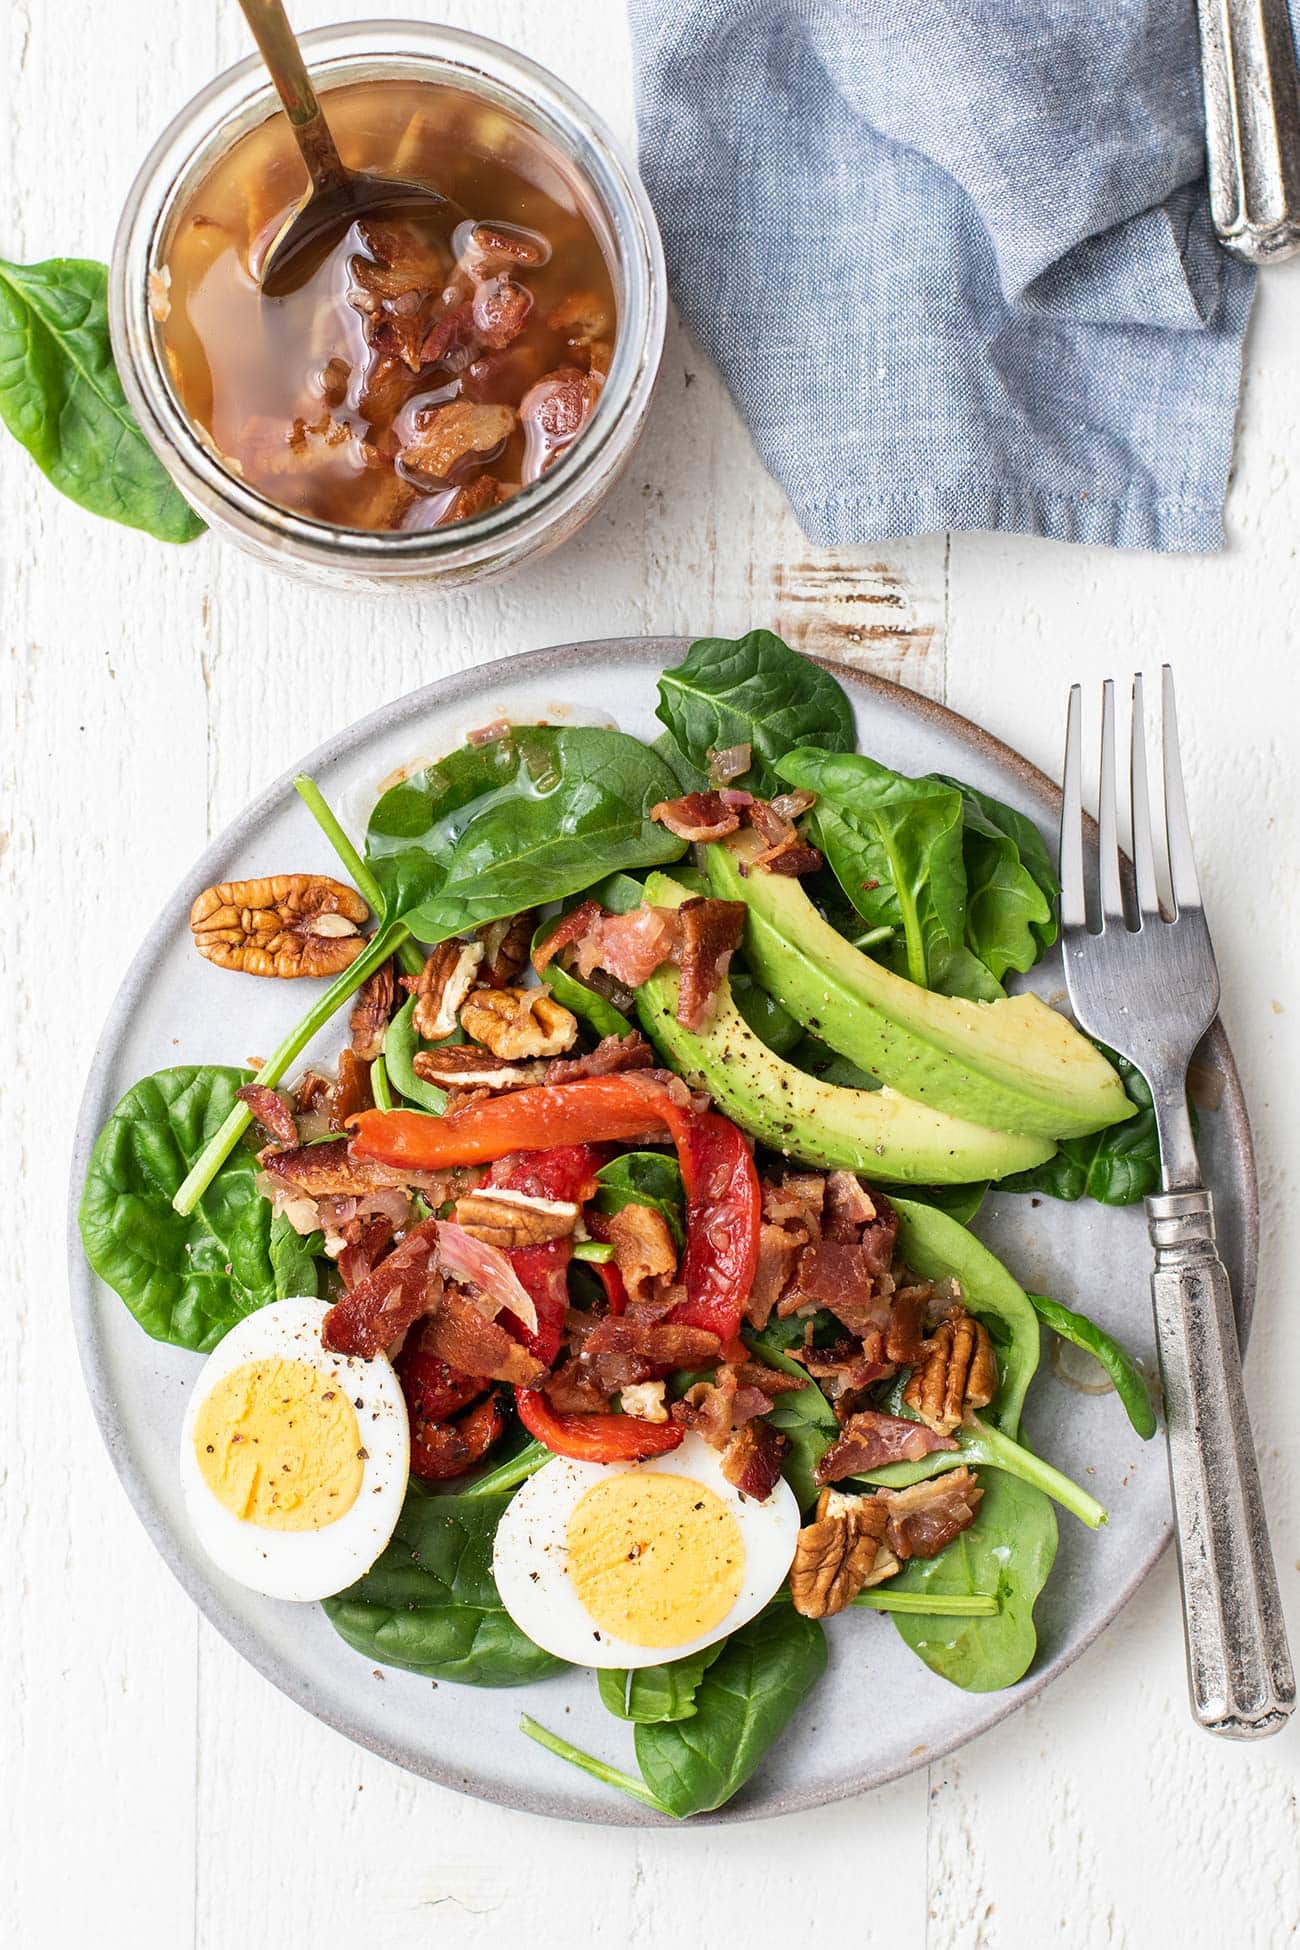 https://sunkissedkitchen.com/wp-content/uploads/2020/12/wilted-spinach-salad-hot-bacon-dressing.jpg